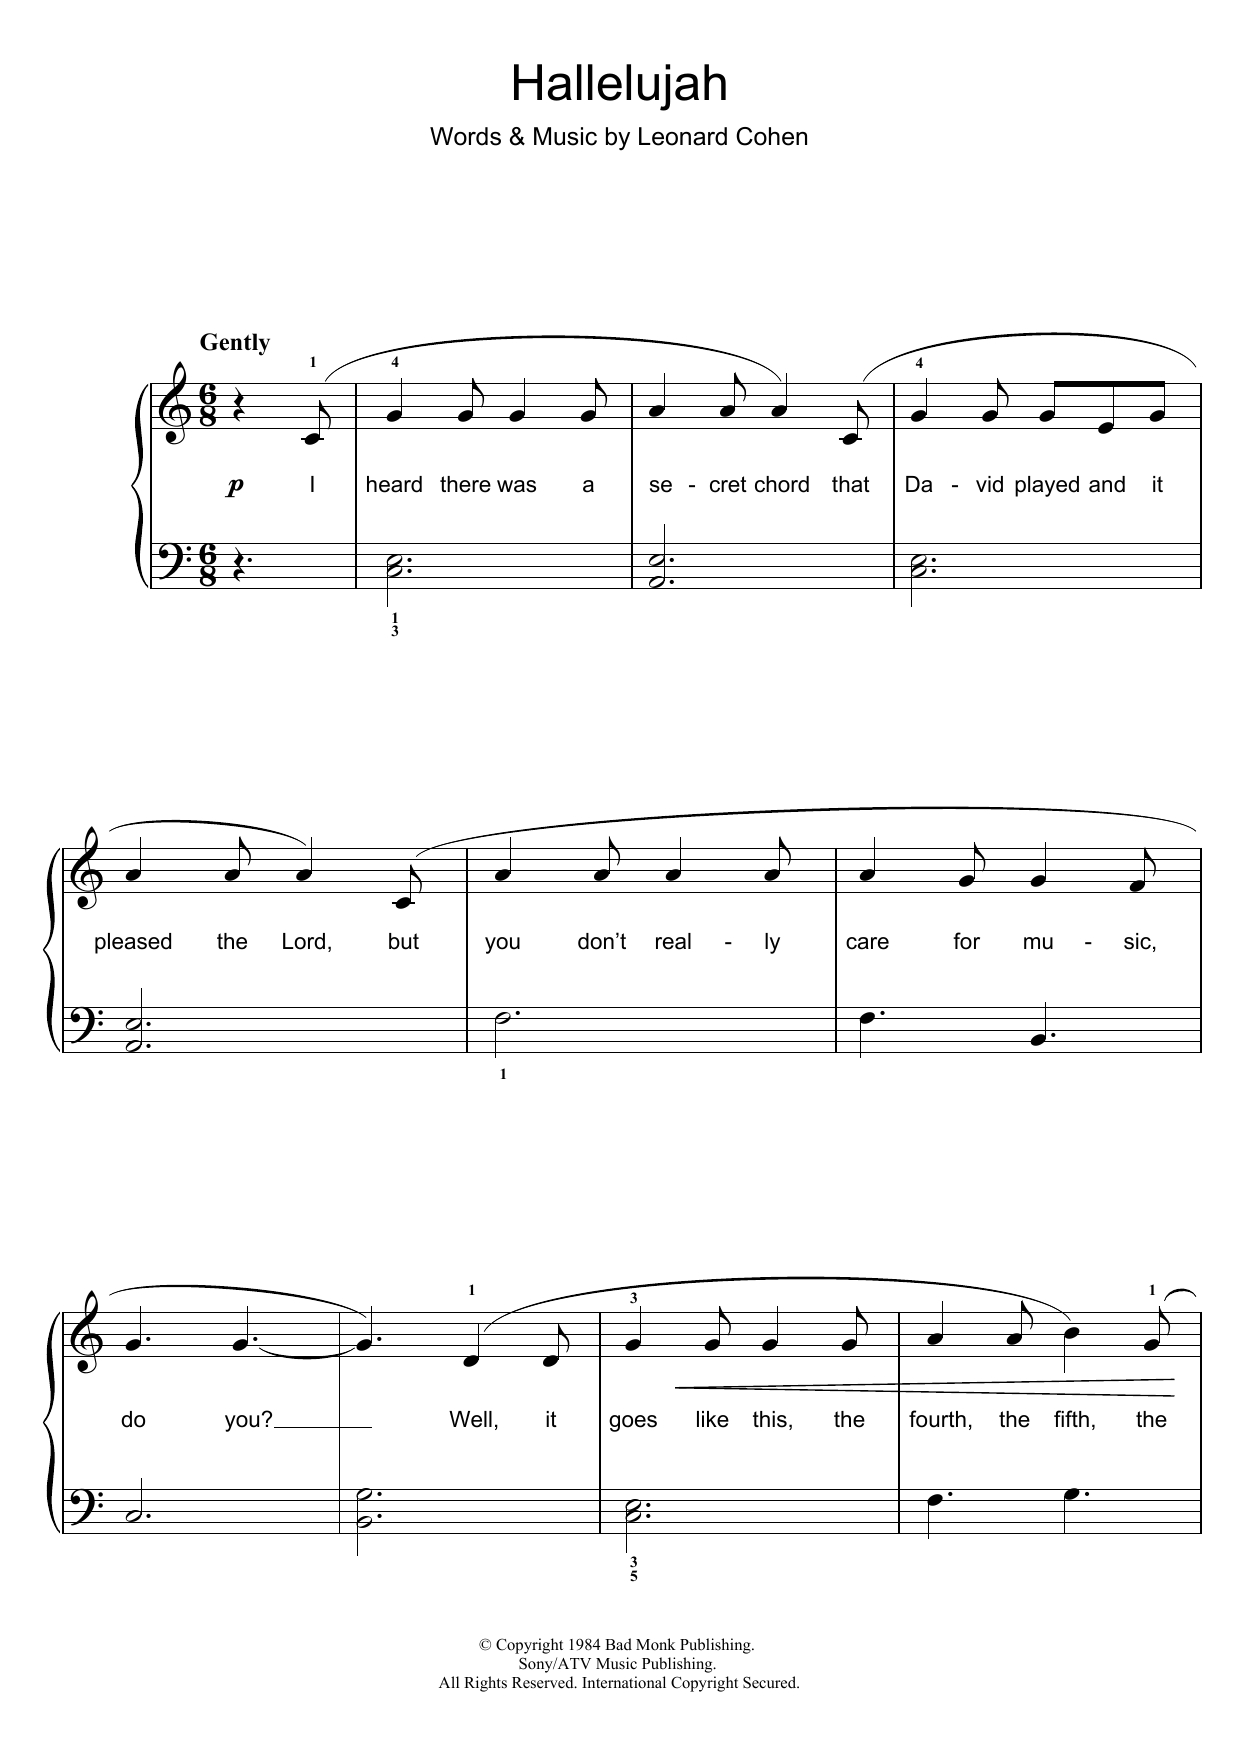 Free Printable Piano Sheet Music For Hallelujah By Leonard Cohen Free 